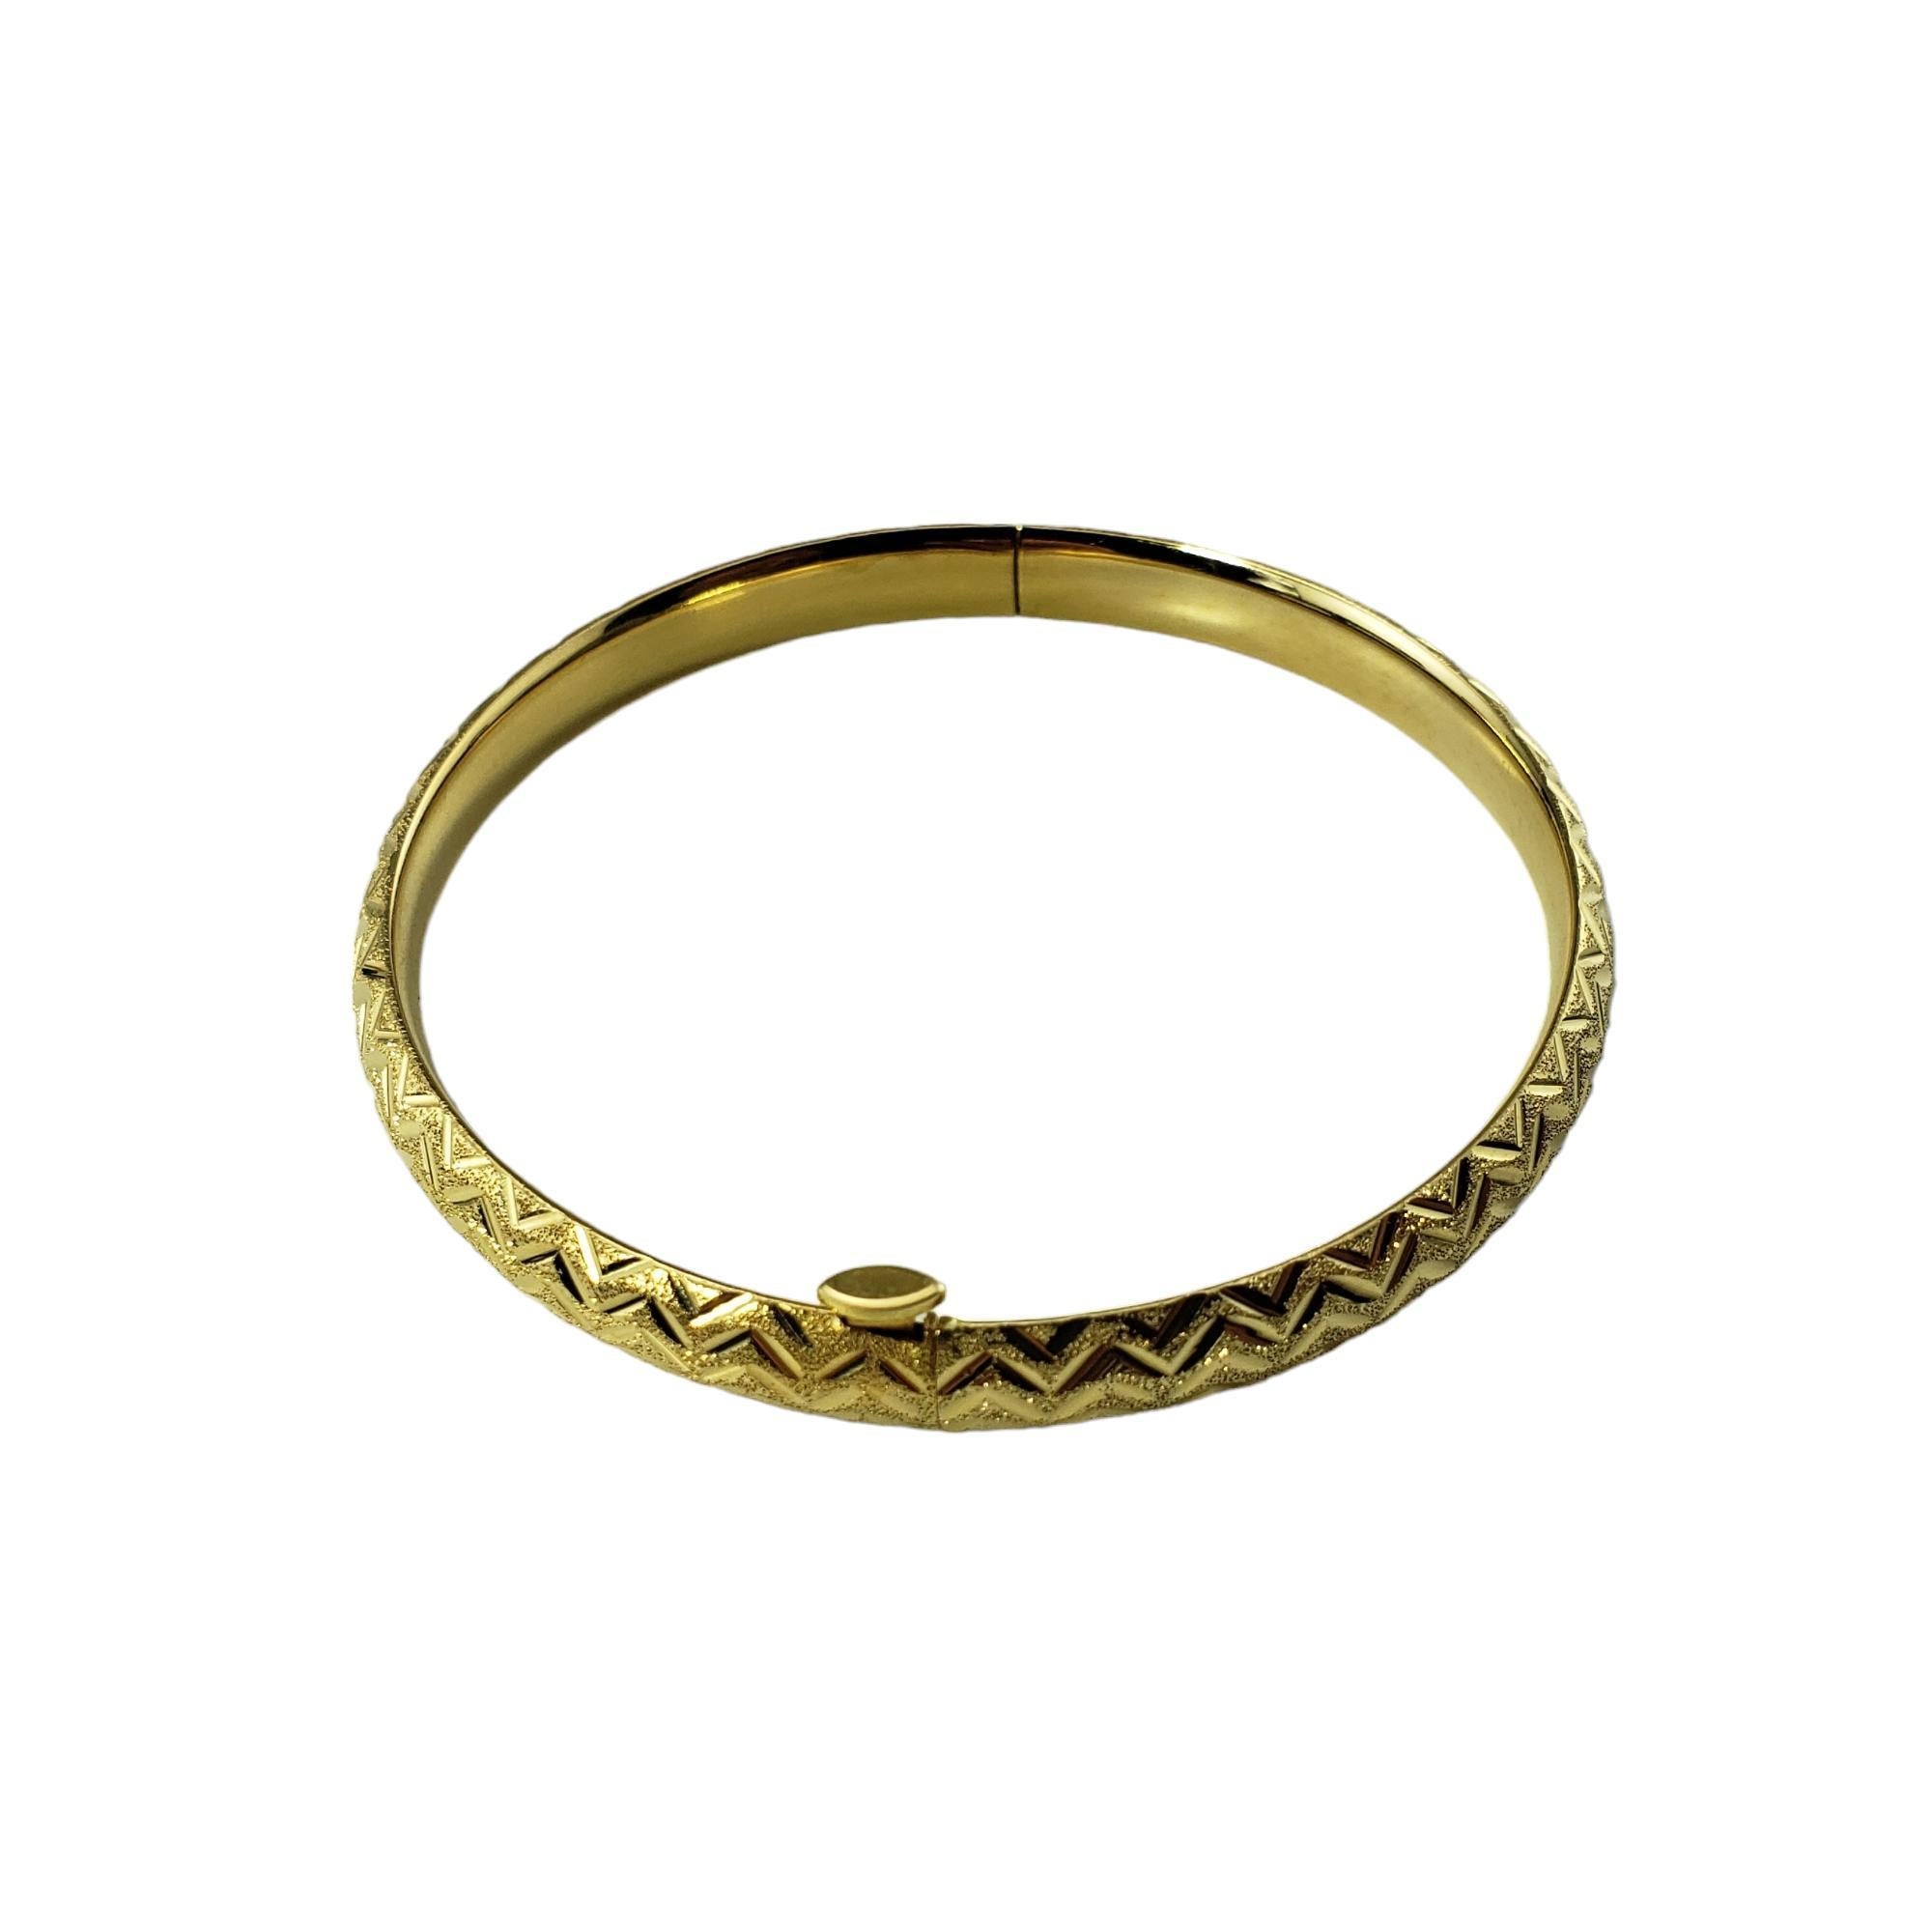 Vintage 14 Karat Yellow Gold Bangle Bracelet-

This elegant bangle bracelet is crafted in beautifully detailed 14K yellow gold.  Width:  6 mm.

Size: 7 inches

Stamped: 14K

Weight:  7.0 gr./  4.5 dwt.

Very good condition, professionally